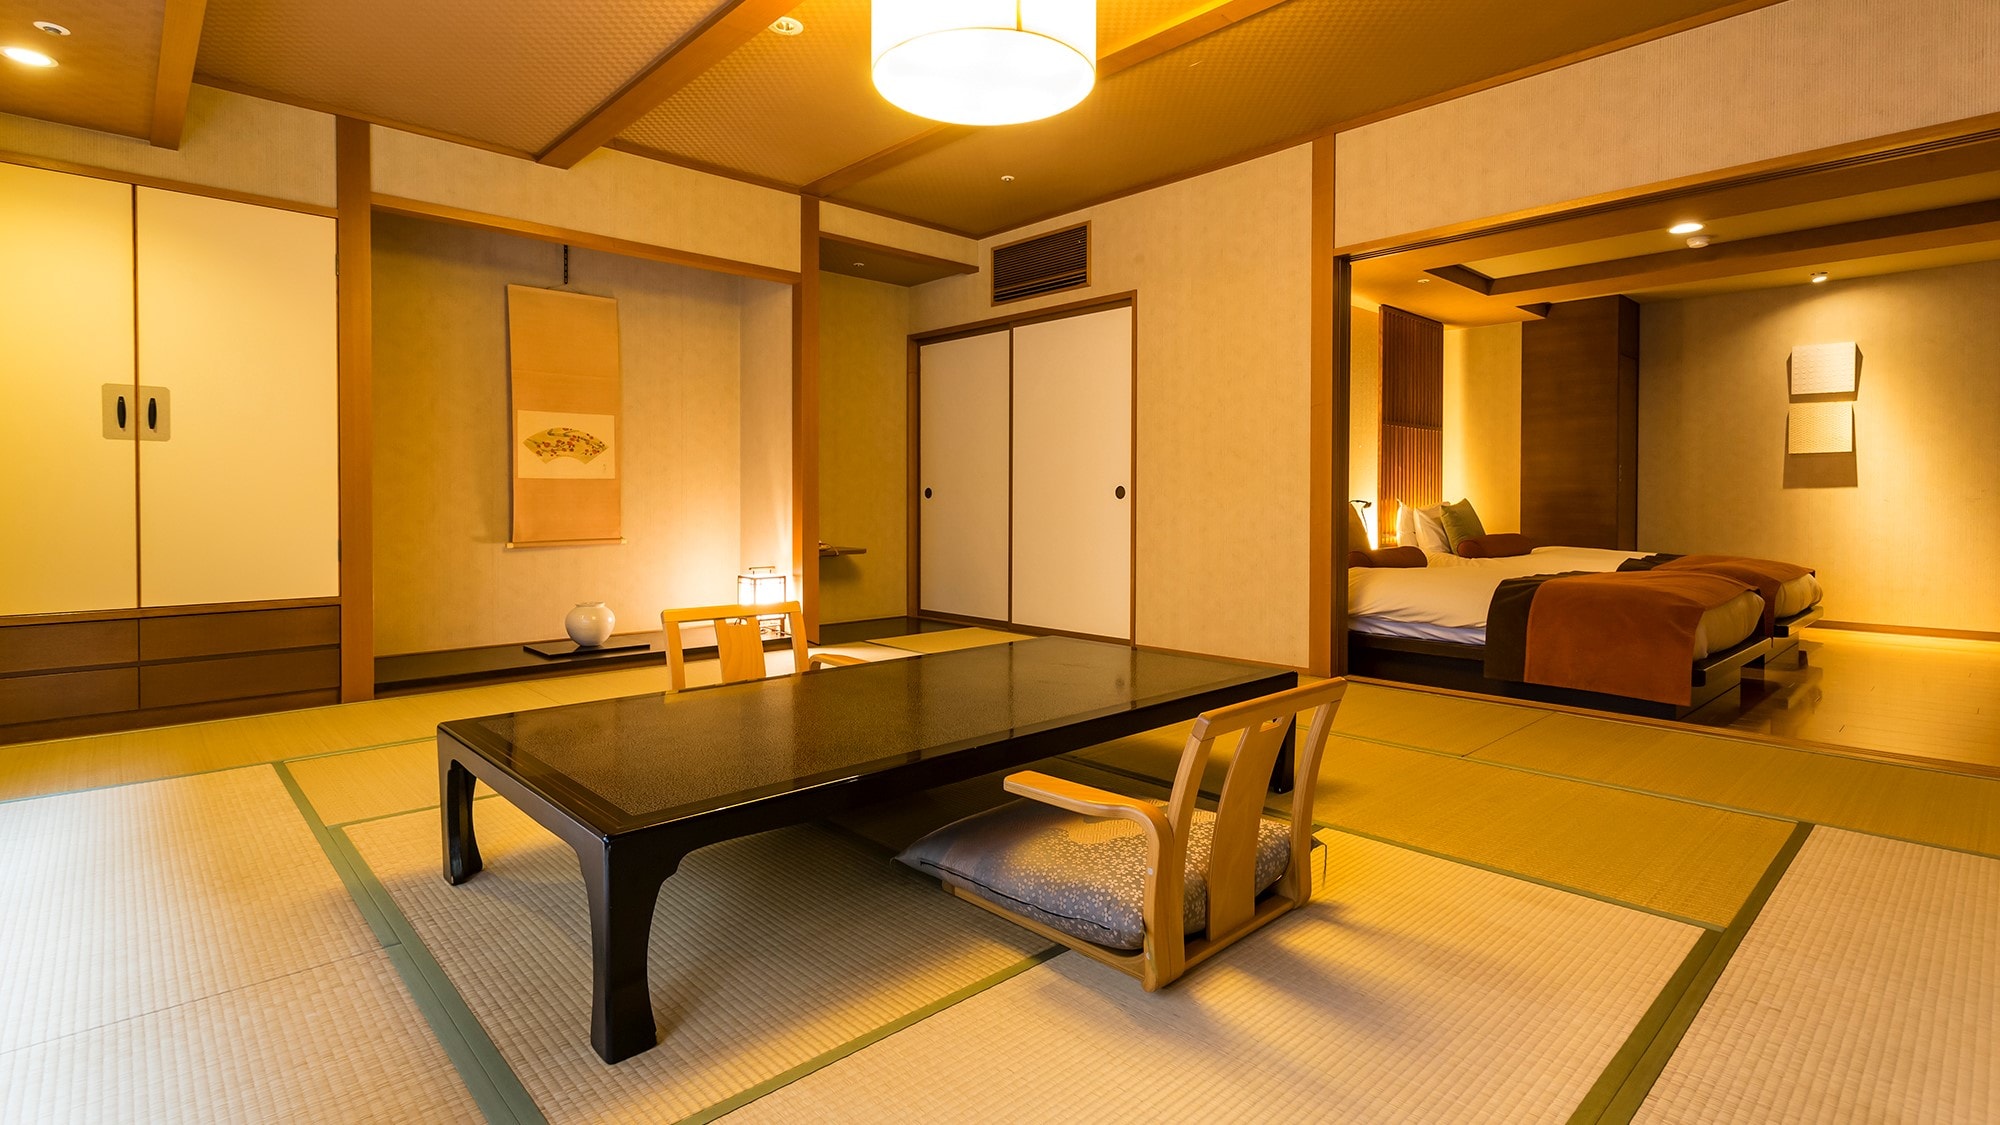 An example of a Japanese-Western style room with an open-air bath on the city side